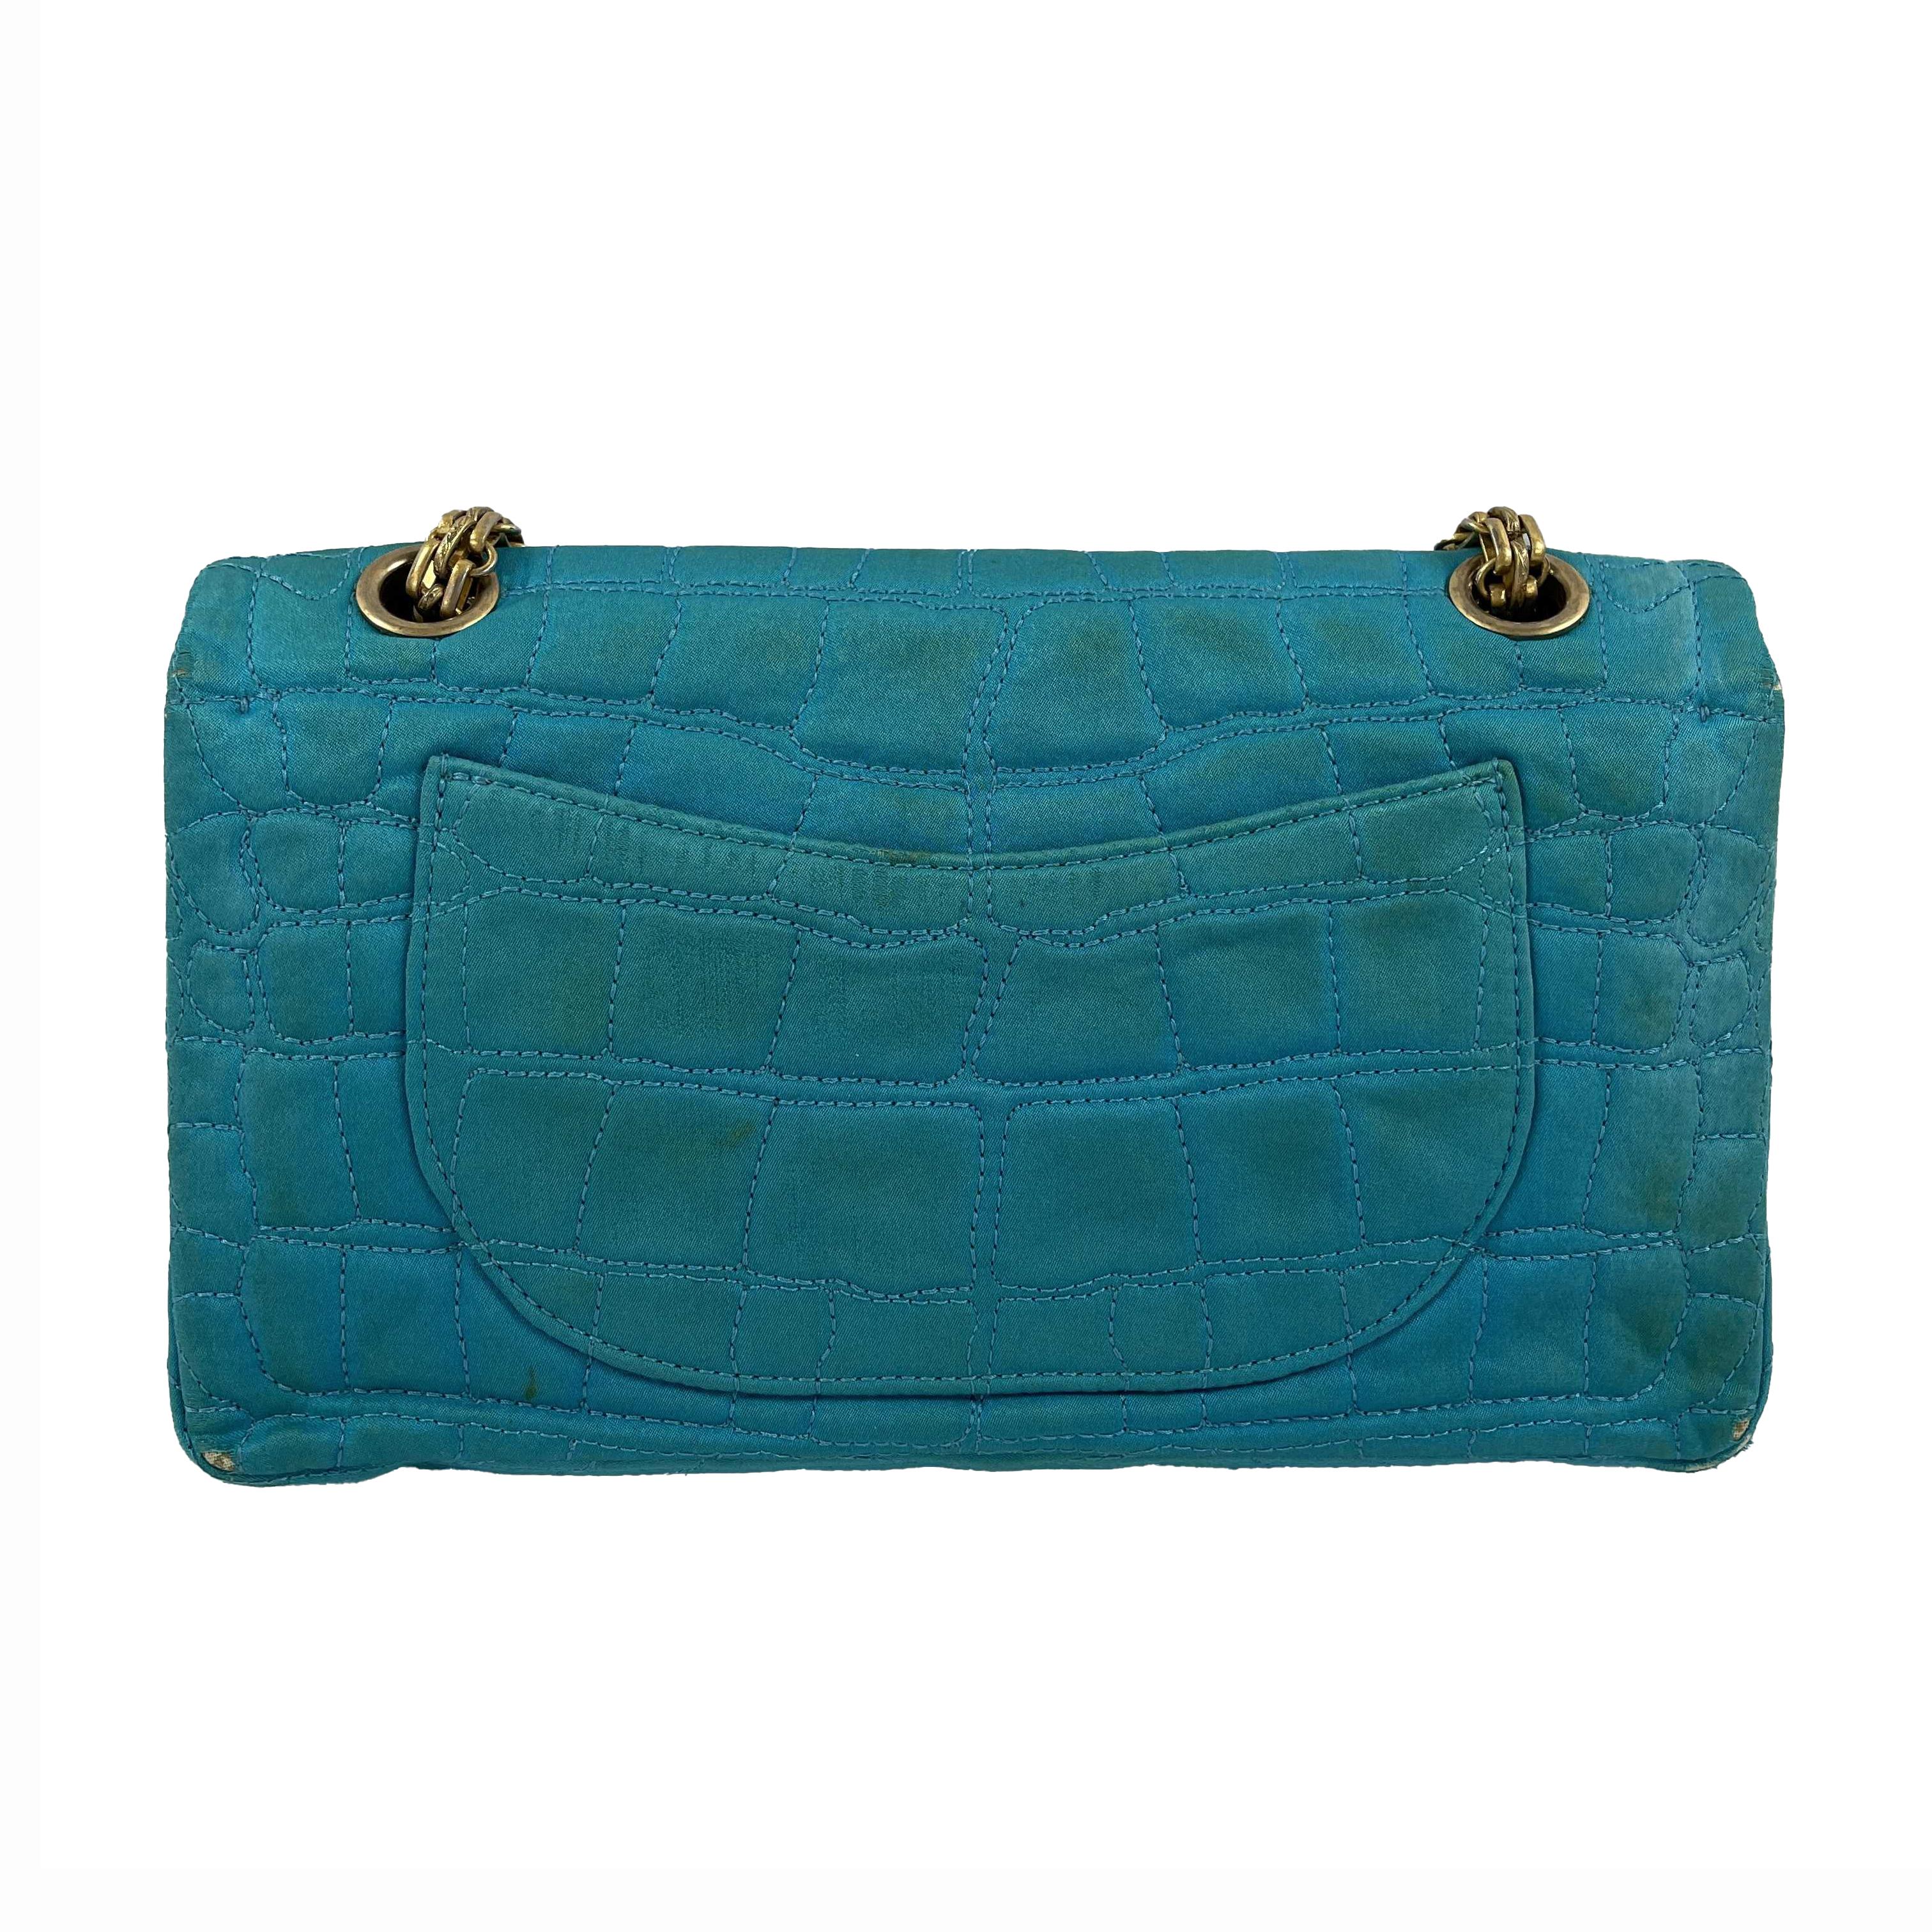 CHANEL - Reissue Small 2.55 Satin Crocodile Stitche - Turquoise / Gold Crossbody

Description

This Chanel Reissue 2.55 handbag is from the 2006 to 2008 collection.
It is crafted with a turquoise crocodile stitched satin fabric and gold-toned